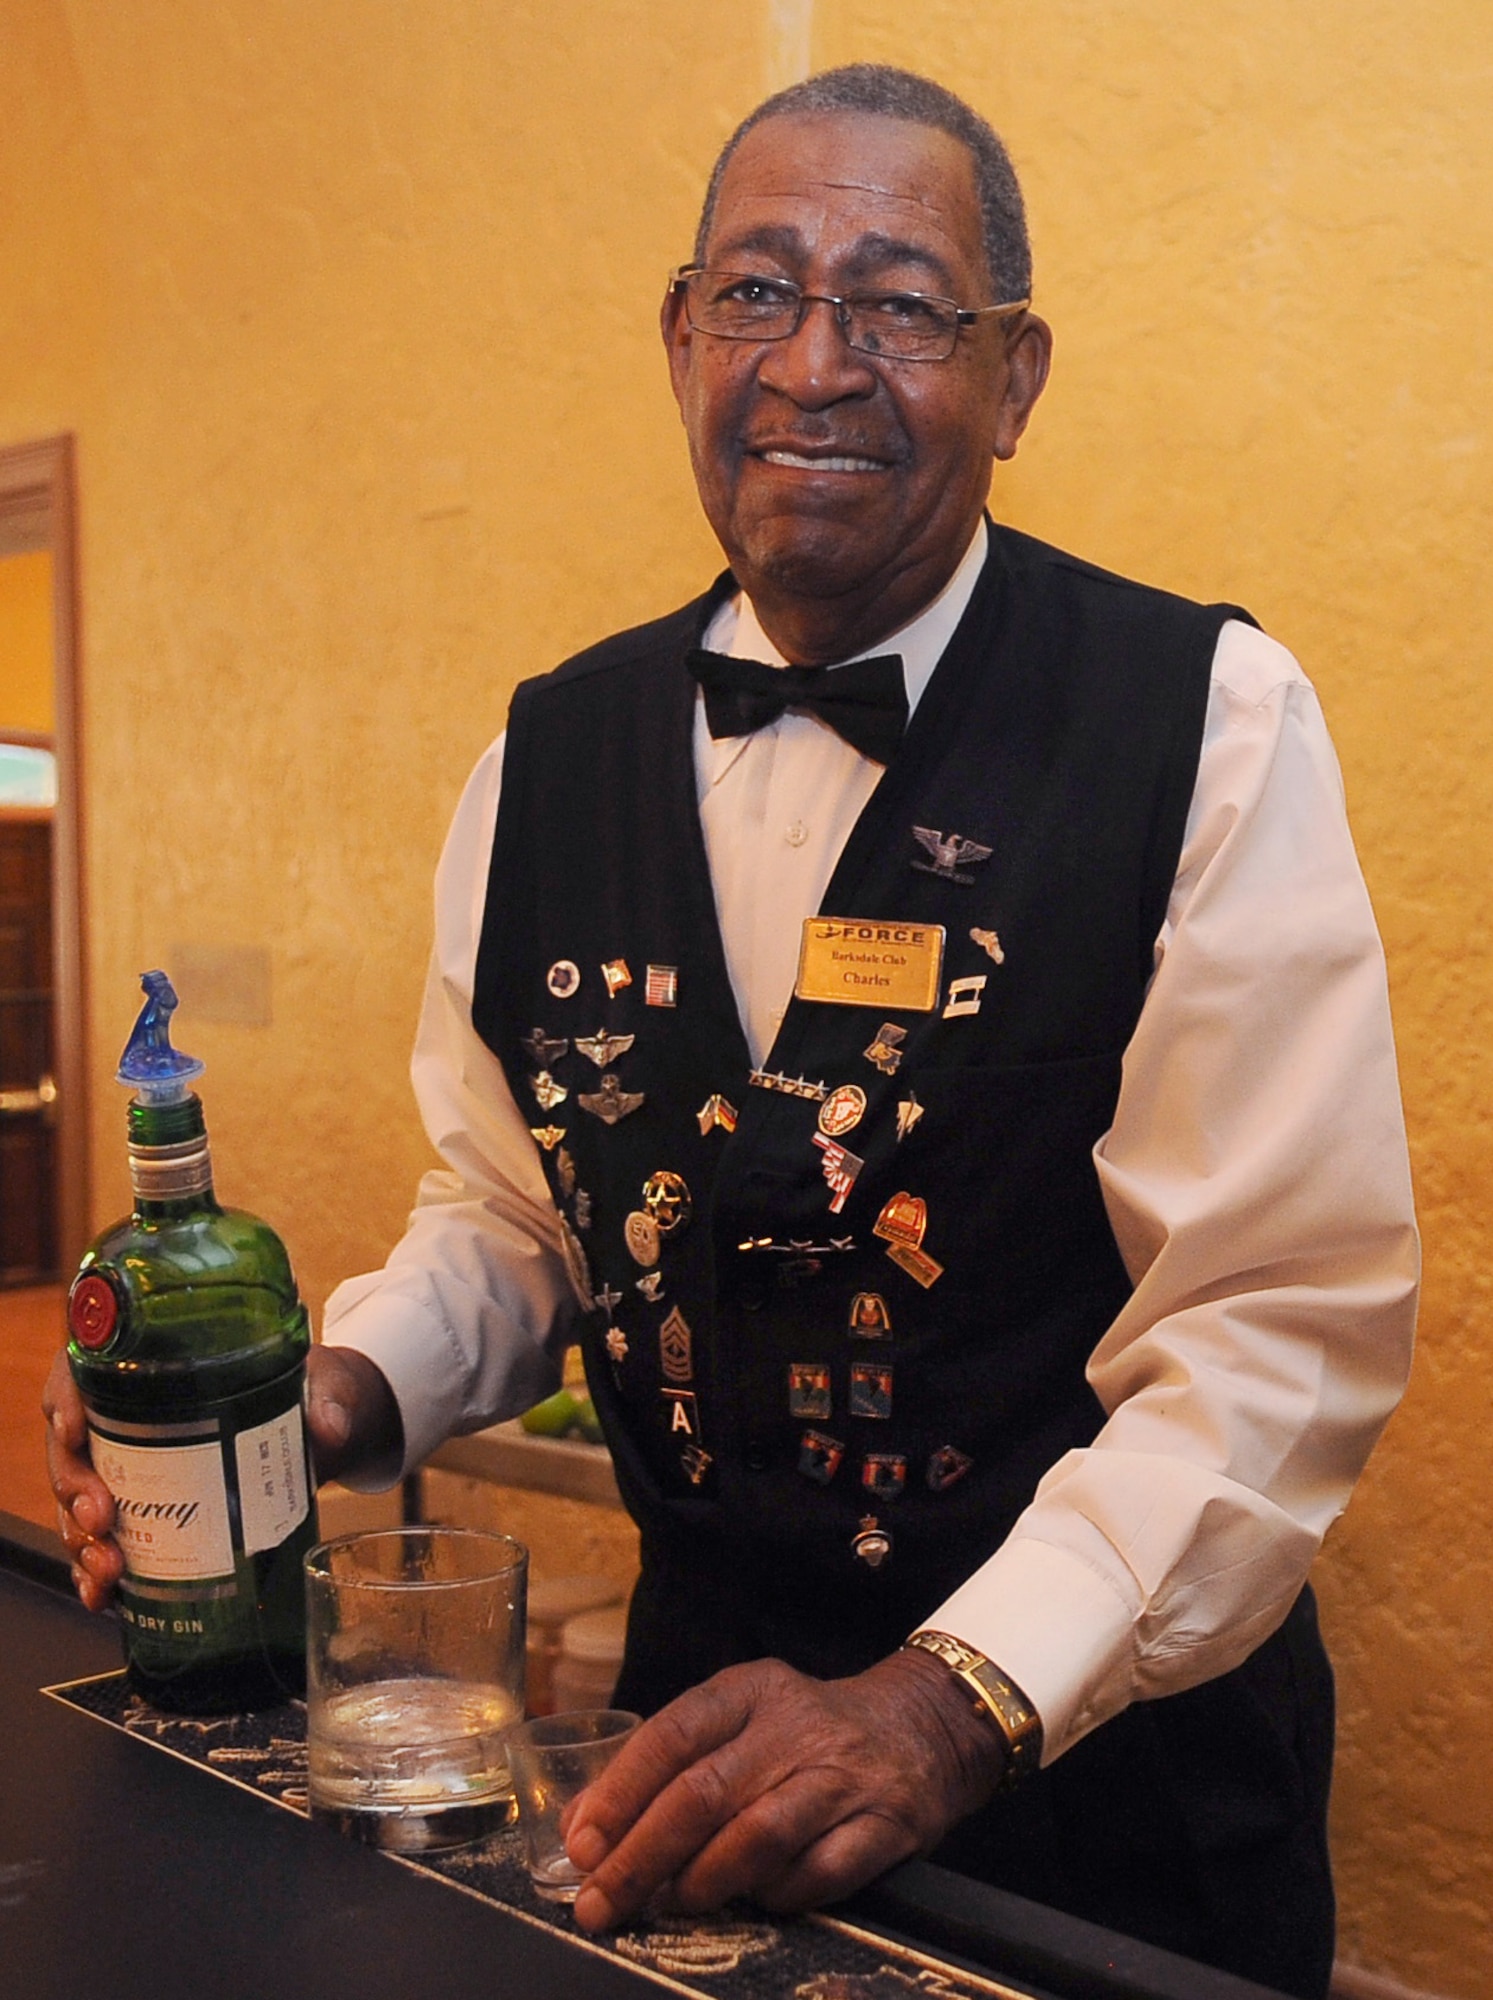 BARKSDALE AIR FORCE BASE, La. -- Charles Baker, Barksdale Officers' Club bartender, prepares a drink for a customer Aug. 27. Charles has been a part of Barksdale for more than 60 years and has met hundreds of foreign and domestic pilots and service members. Charles is famous for his long history here and his keen memory of an Airman's favorite drink. (U.S. Air Force photo/Senior Airman Amber Ashcraft) (RELEASED)